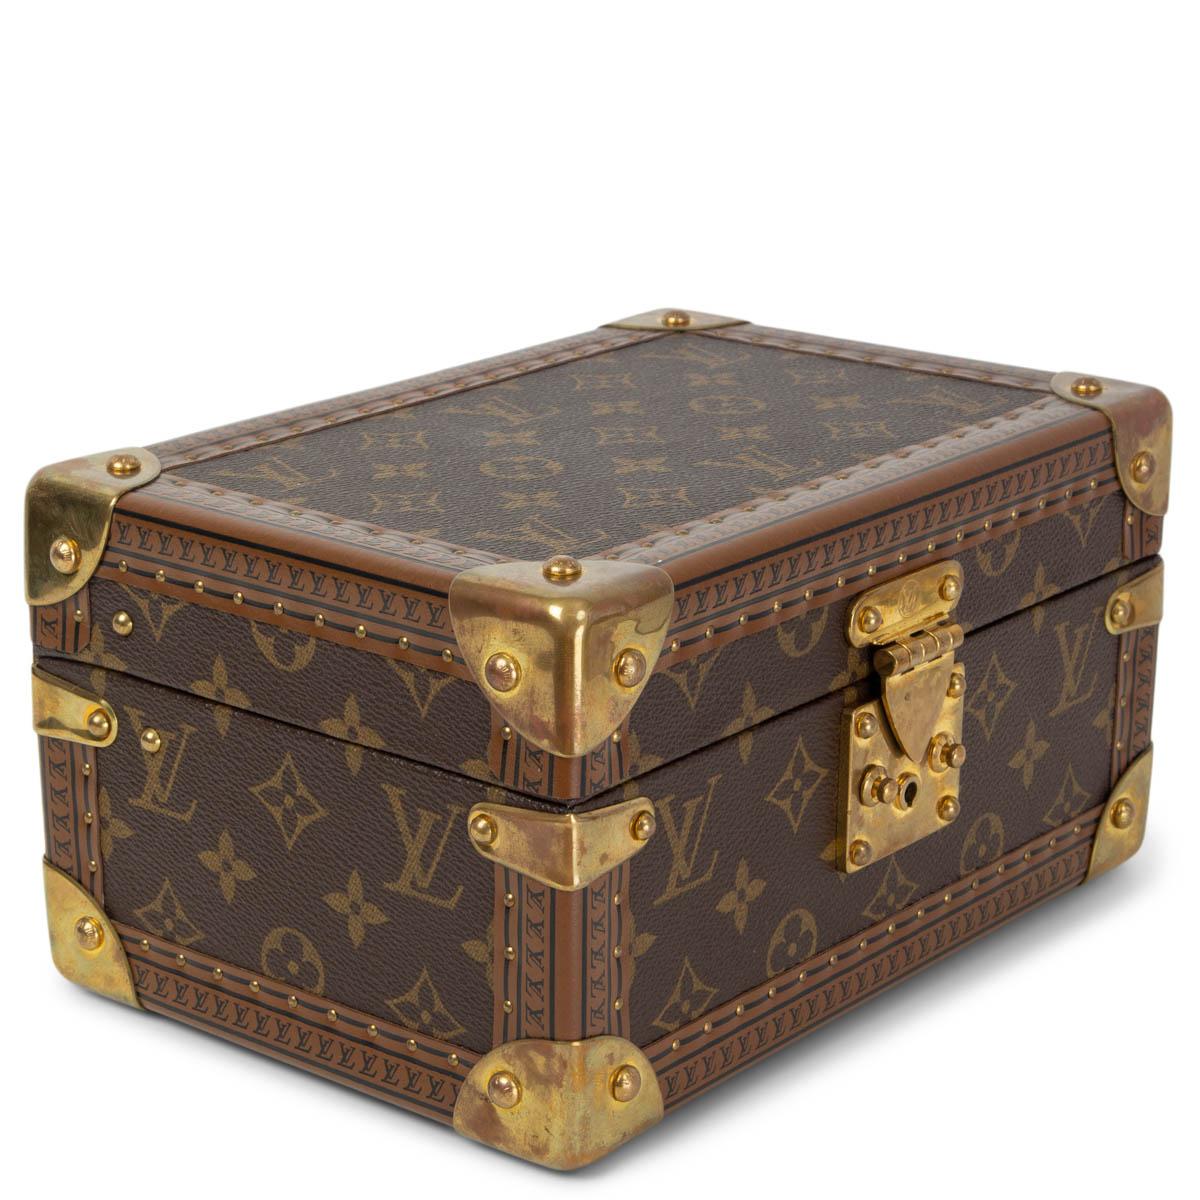 100% authentic Louis Vuitton Tresor Jewelry Box in classic brown and olive green coated monogram canvas and with hand-finished brass details. Opens with a trunk lock and key. Lined in beige alcantara and divided in two compartments. Has been carried